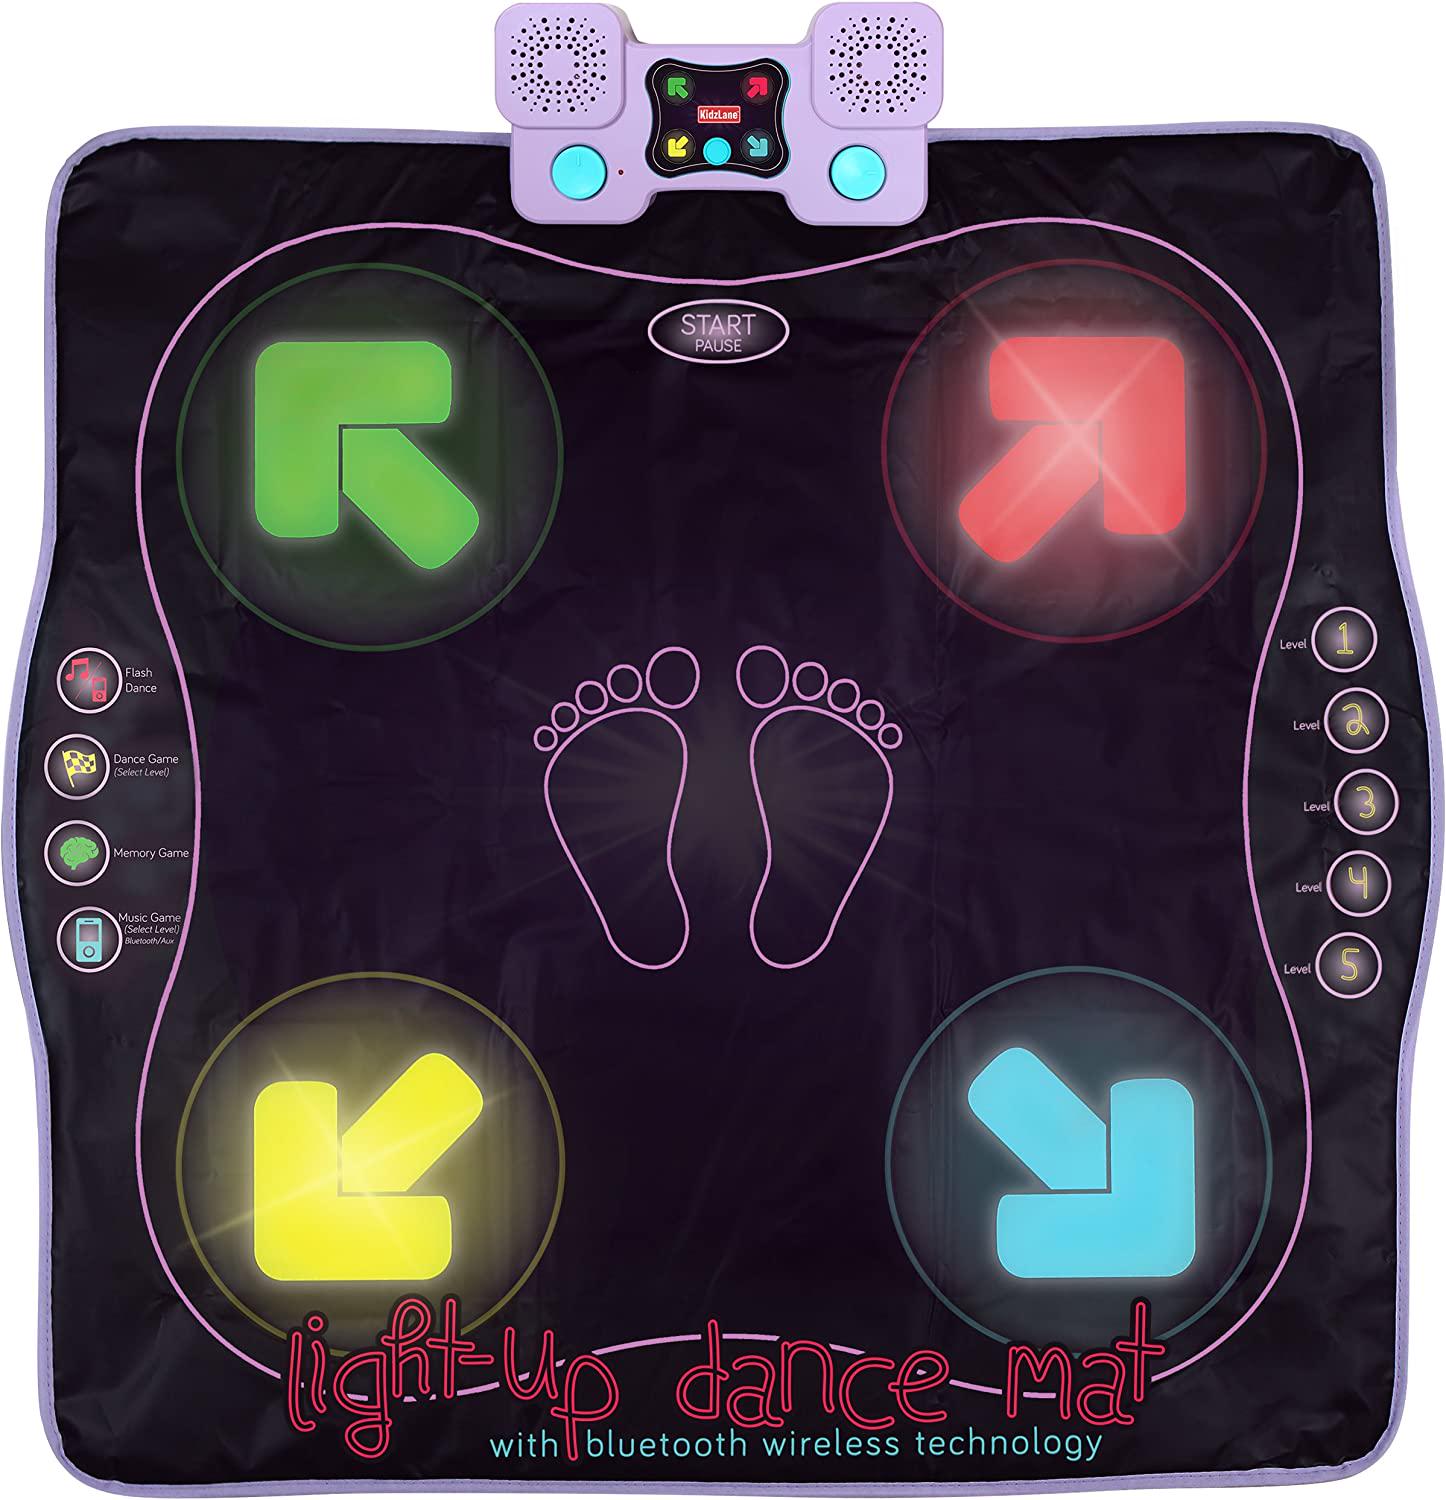 kidzlane, Light Up Dance Mat - Arcade Style Dance Games with Built In Music Tracks and Bluetooth Wireless Technology